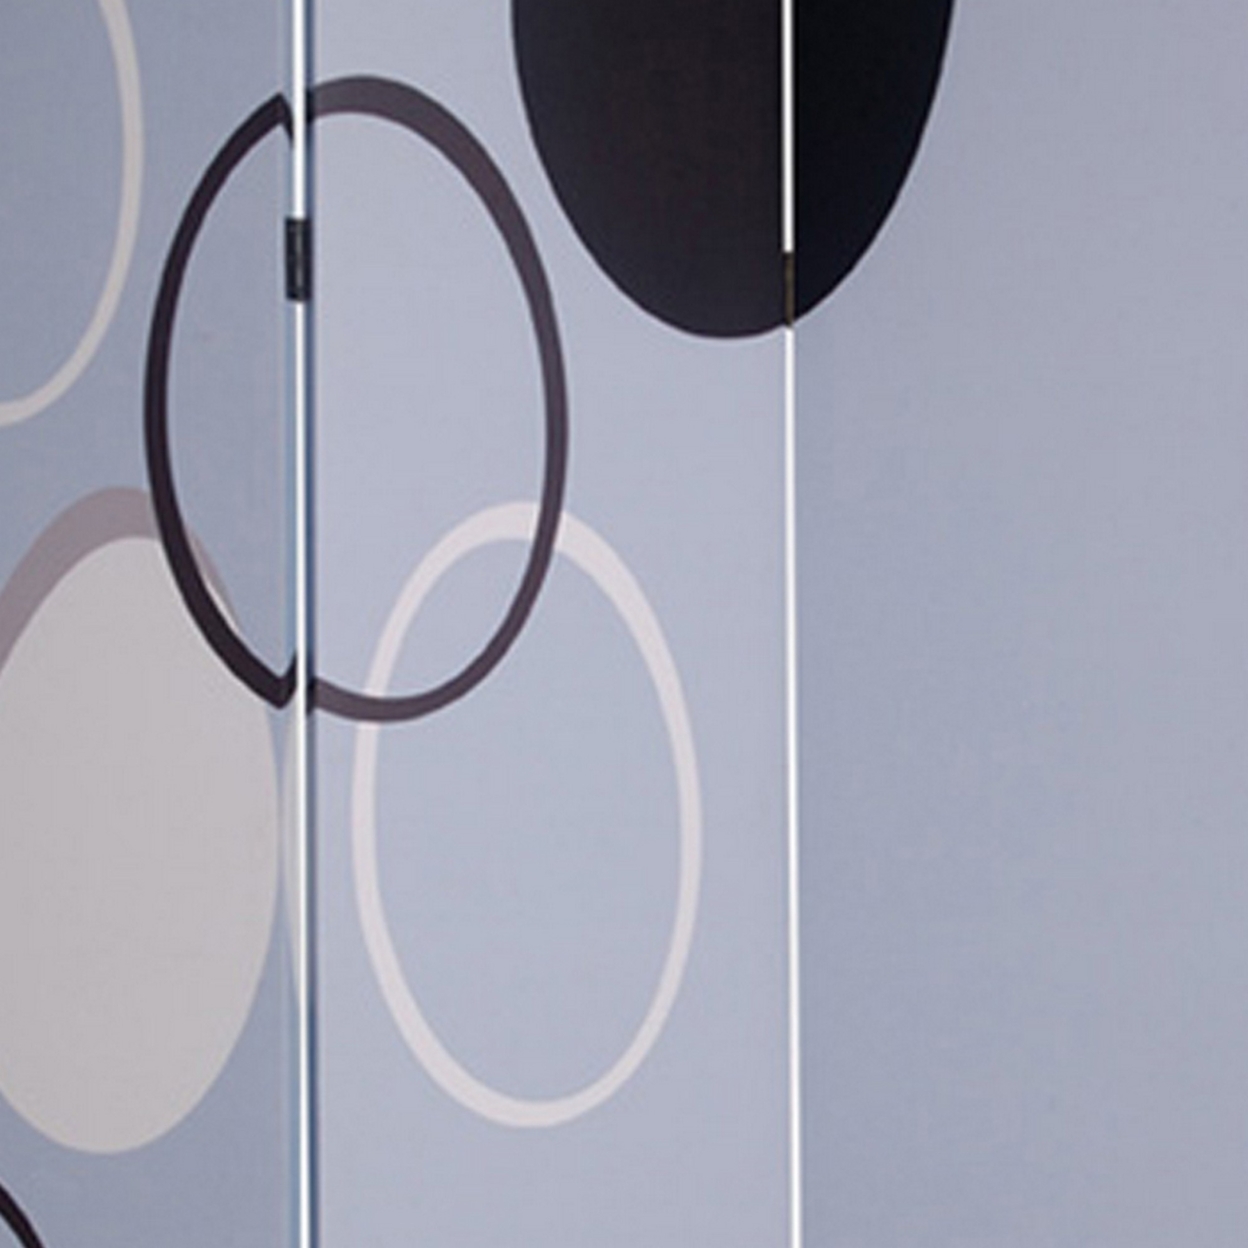 3 Panel Room Divider With Overlapping Circles Pattern, Black And Gray- Saltoro Sherpi